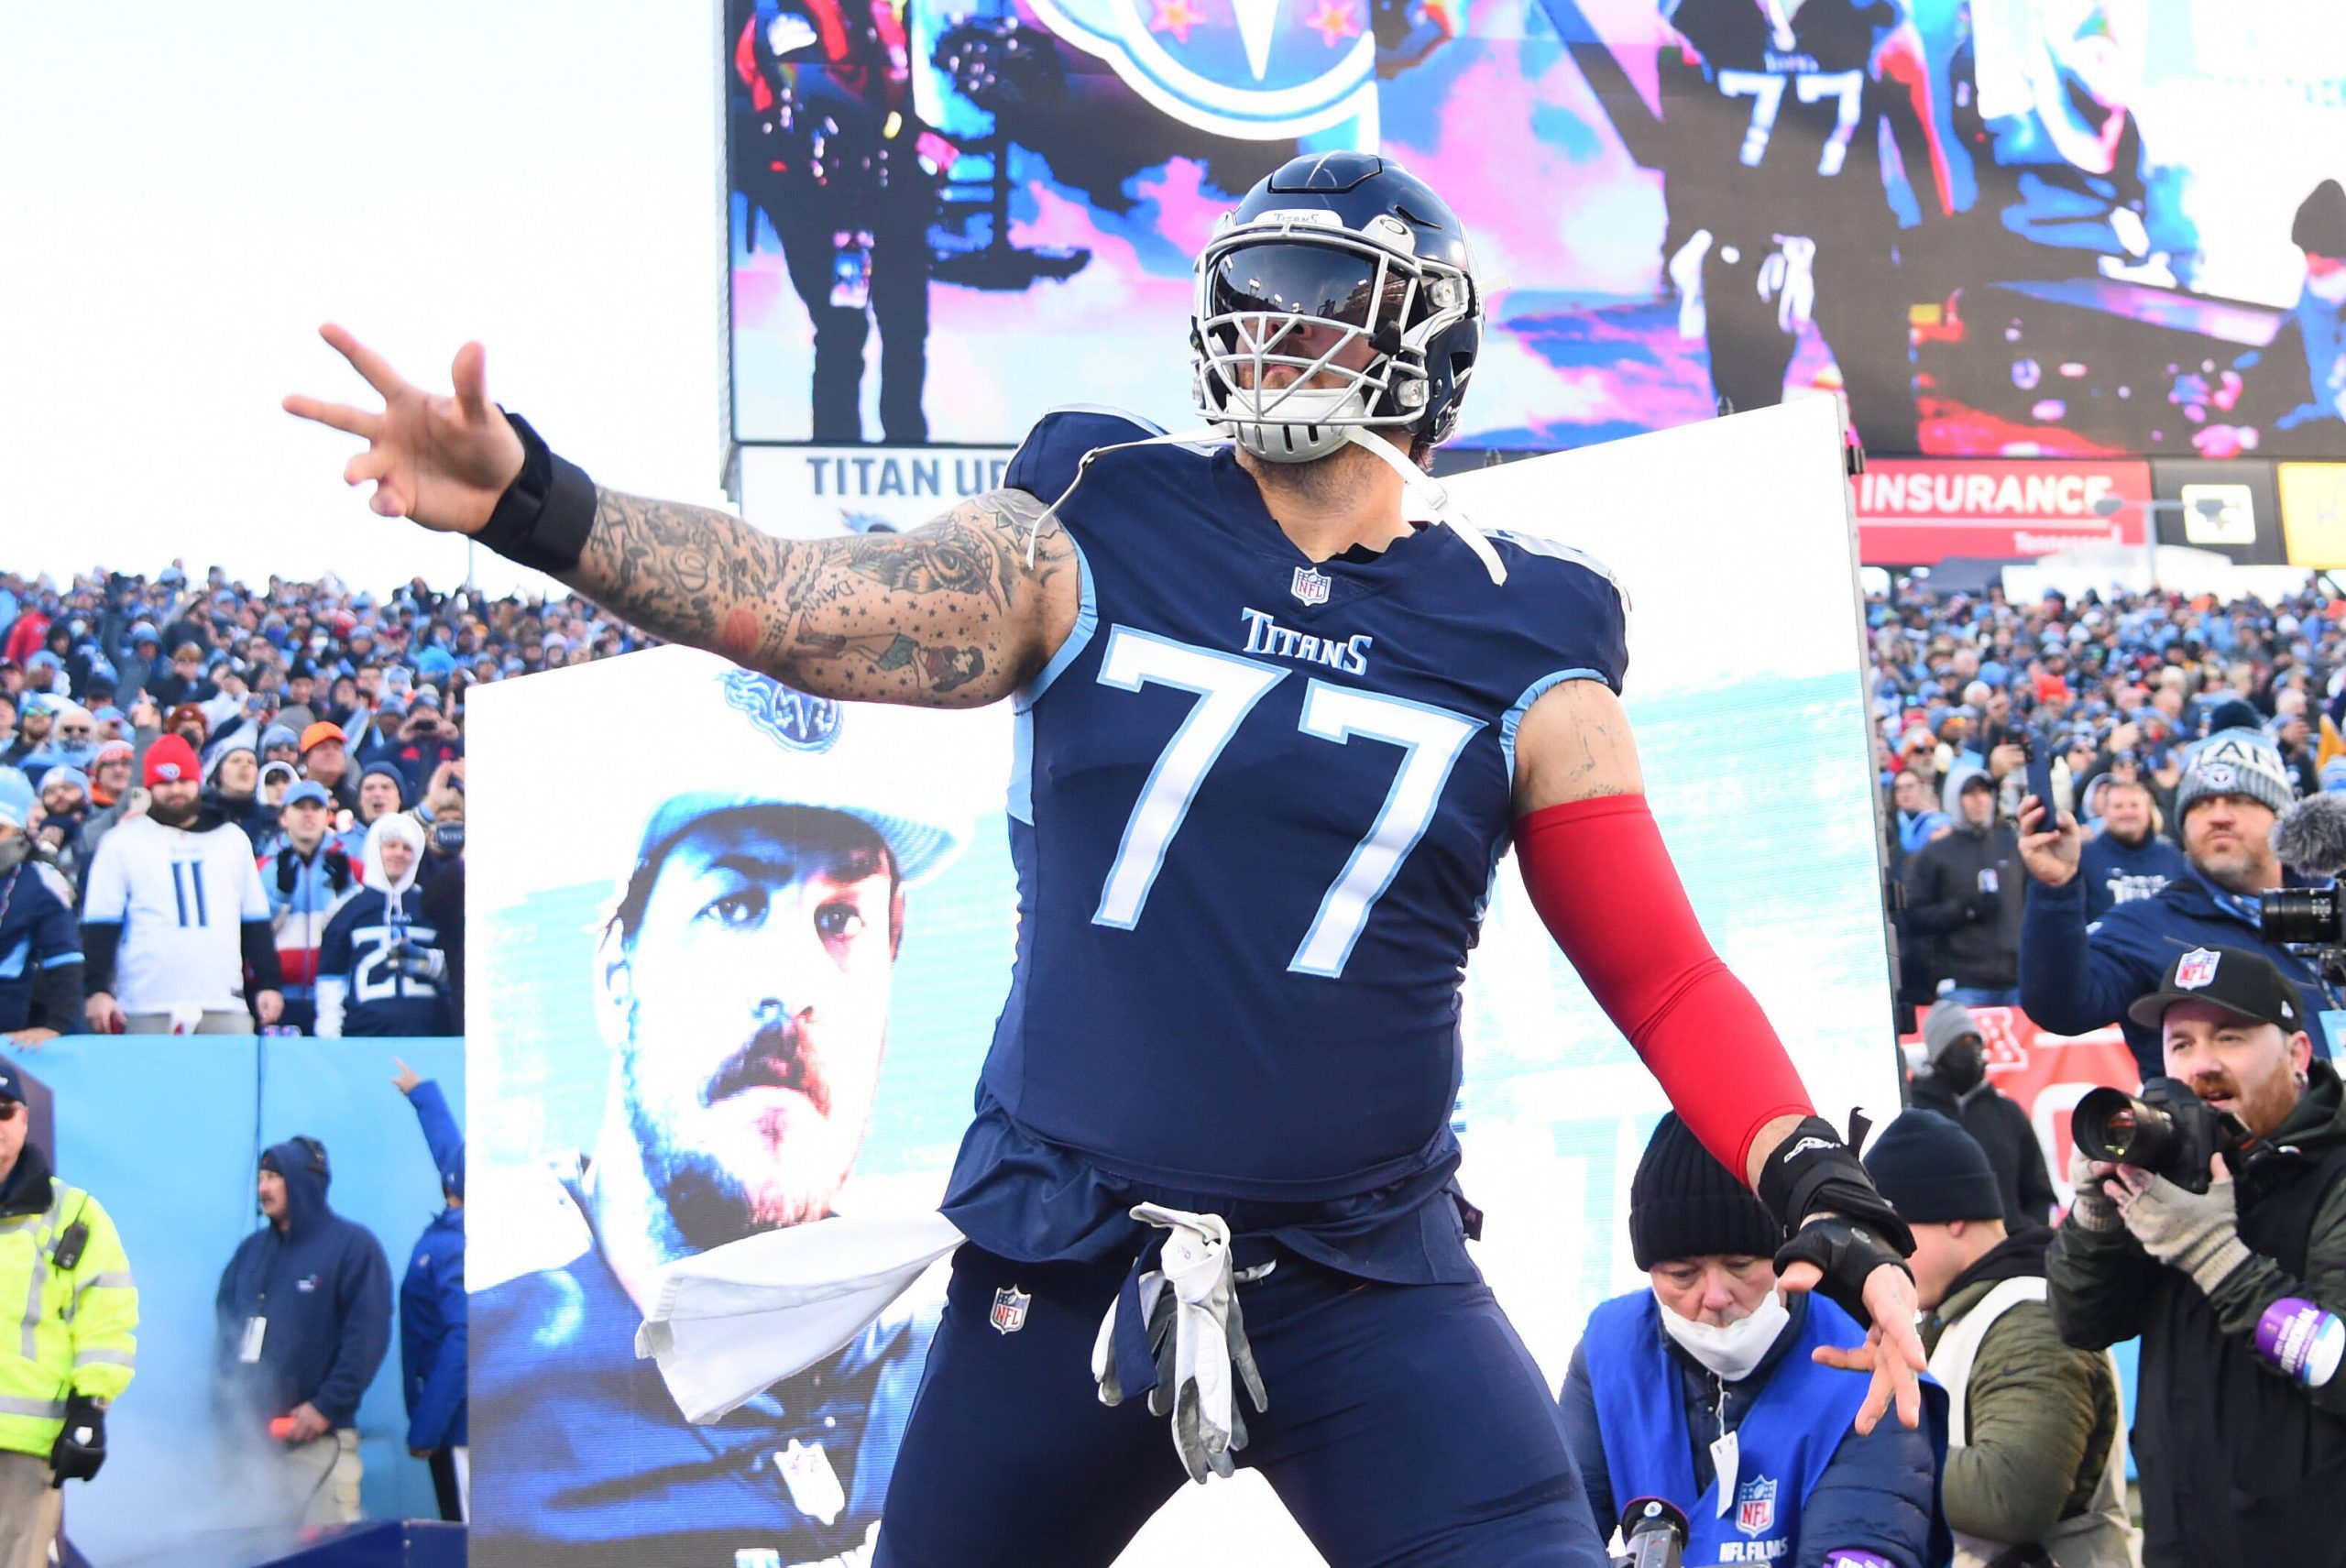 NFL, American Football Herren, USA AFC Divisional Round-Cincinnati Bengals at Tennessee Titans, Jan 22, 2022 Nashville, Tennessee, USA Tennessee Titans offensive tackle Taylor Lewan 77 takes the field before the game against the Cincinnati Bengals during a AFC Divisional playoff football game at Nissan Stadium. Mandatory Credit: Christopher Hanewinckel-USA TODAY Sports, 22.01.2022 16:23:32, 17559994, AFC Divisional, Taylor Lewan, NFL, Nissan Stadium, Tennessee Titans, Cincinnati Bengals PUBLICATIONxINxGERxSUIxAUTxONLY Copyright: xChristopherxHanewinckelx 17559994